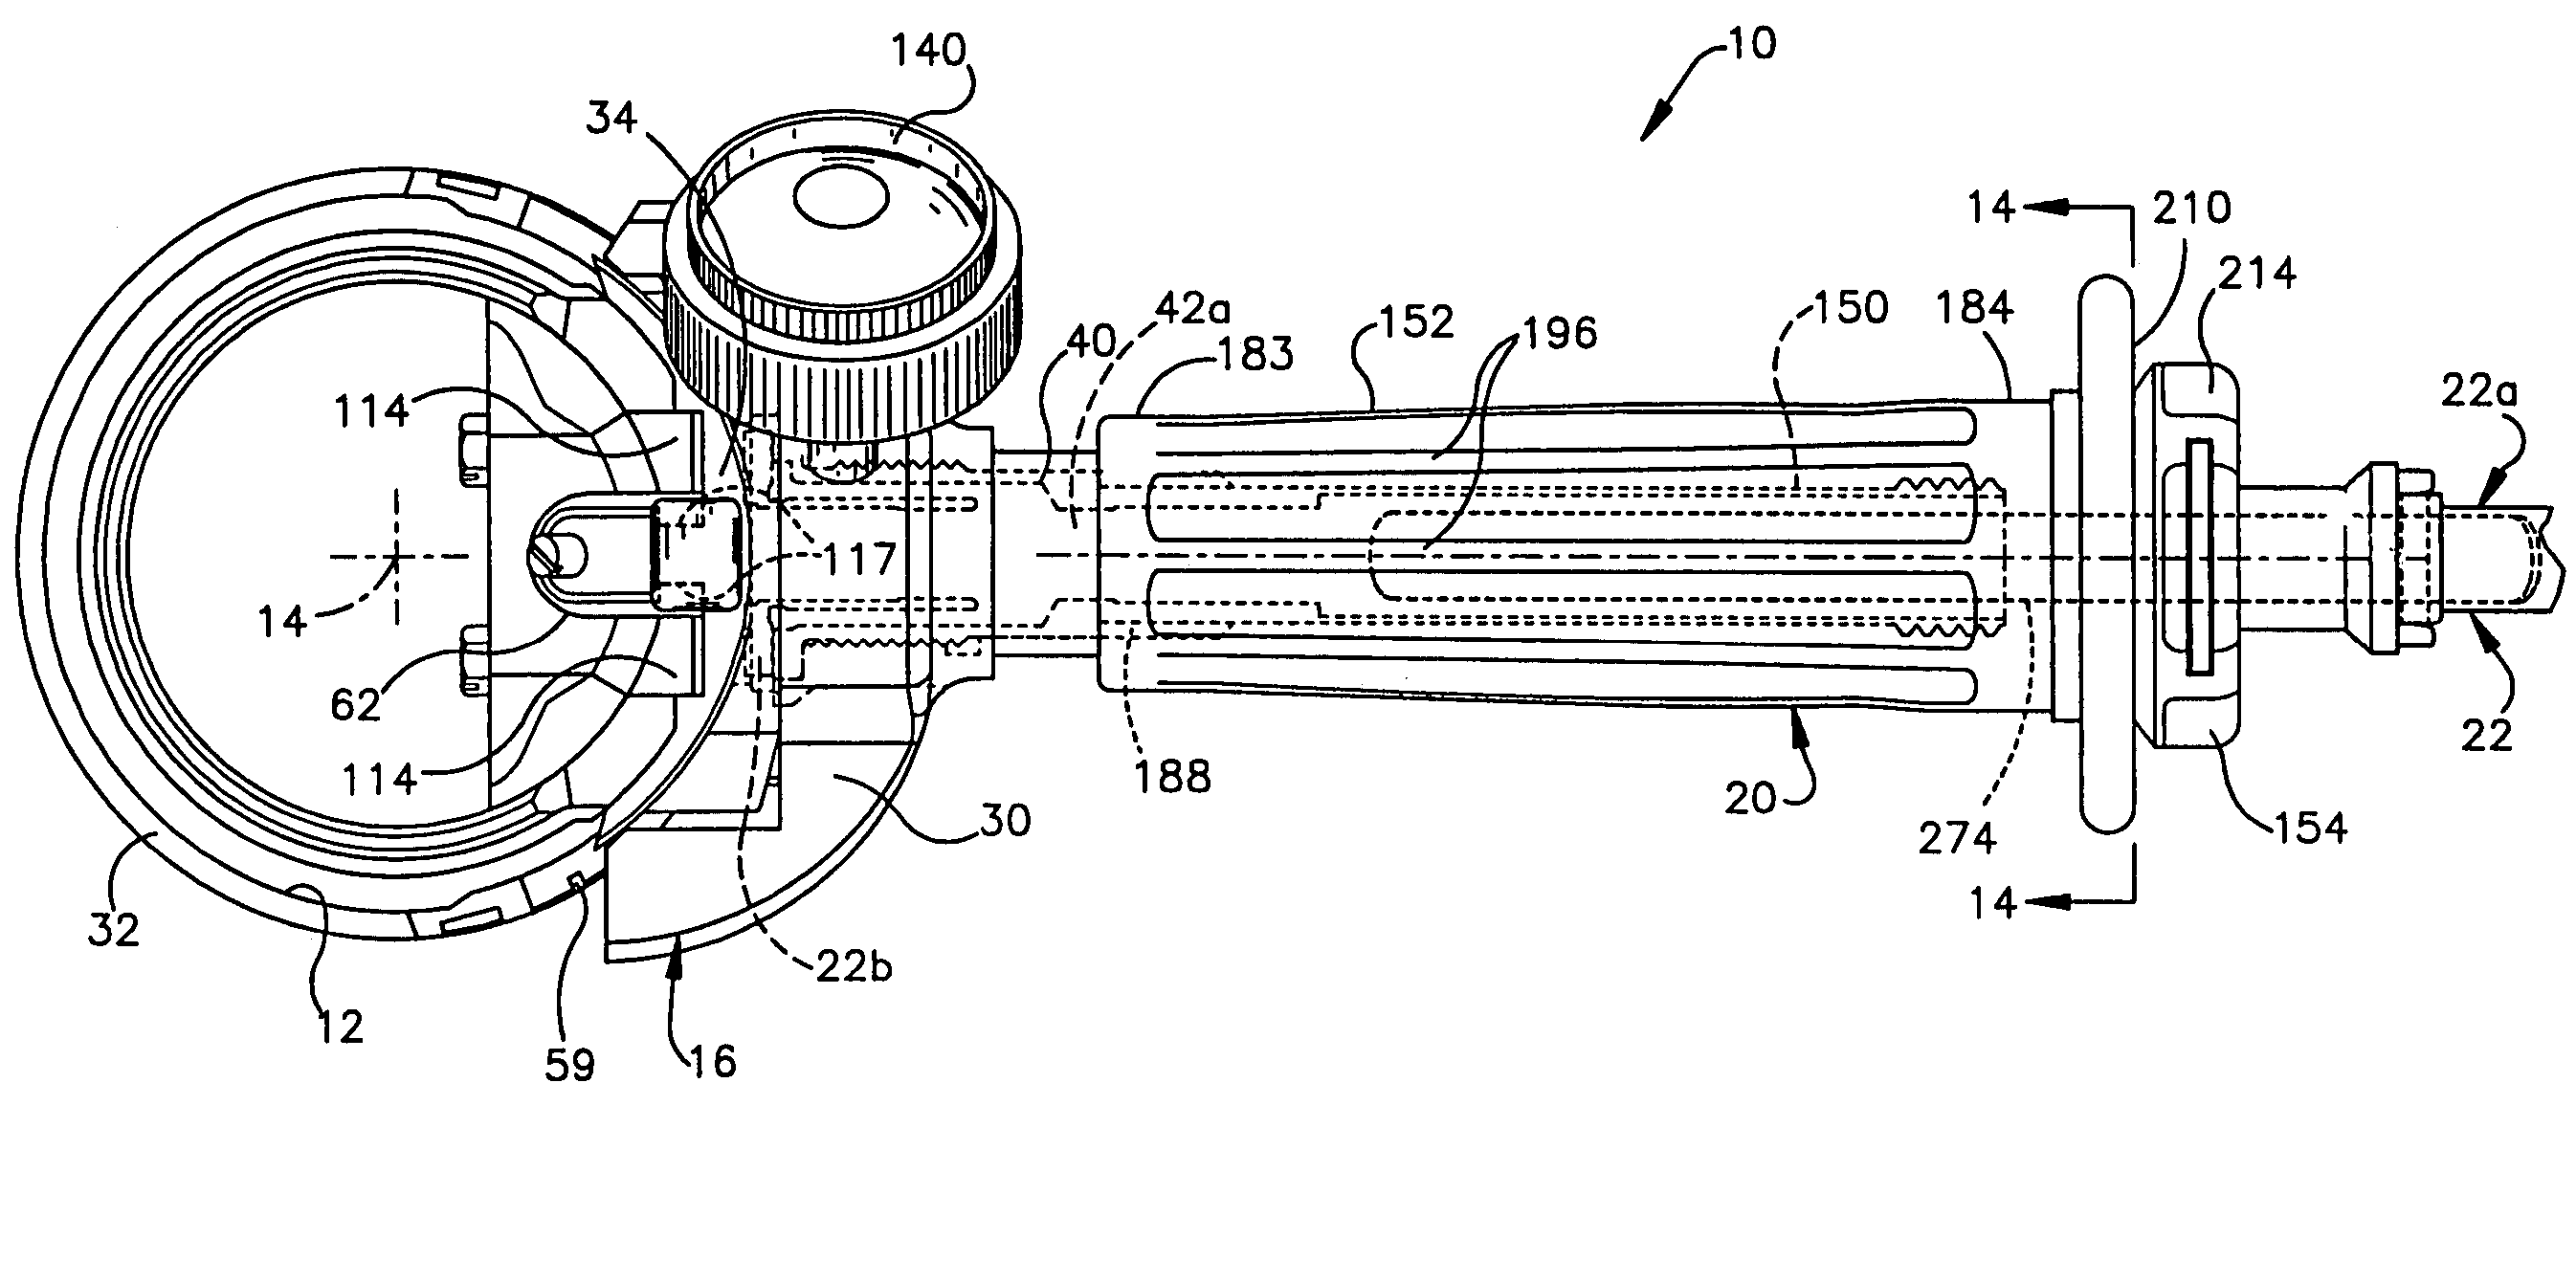 Power operated rotary knife